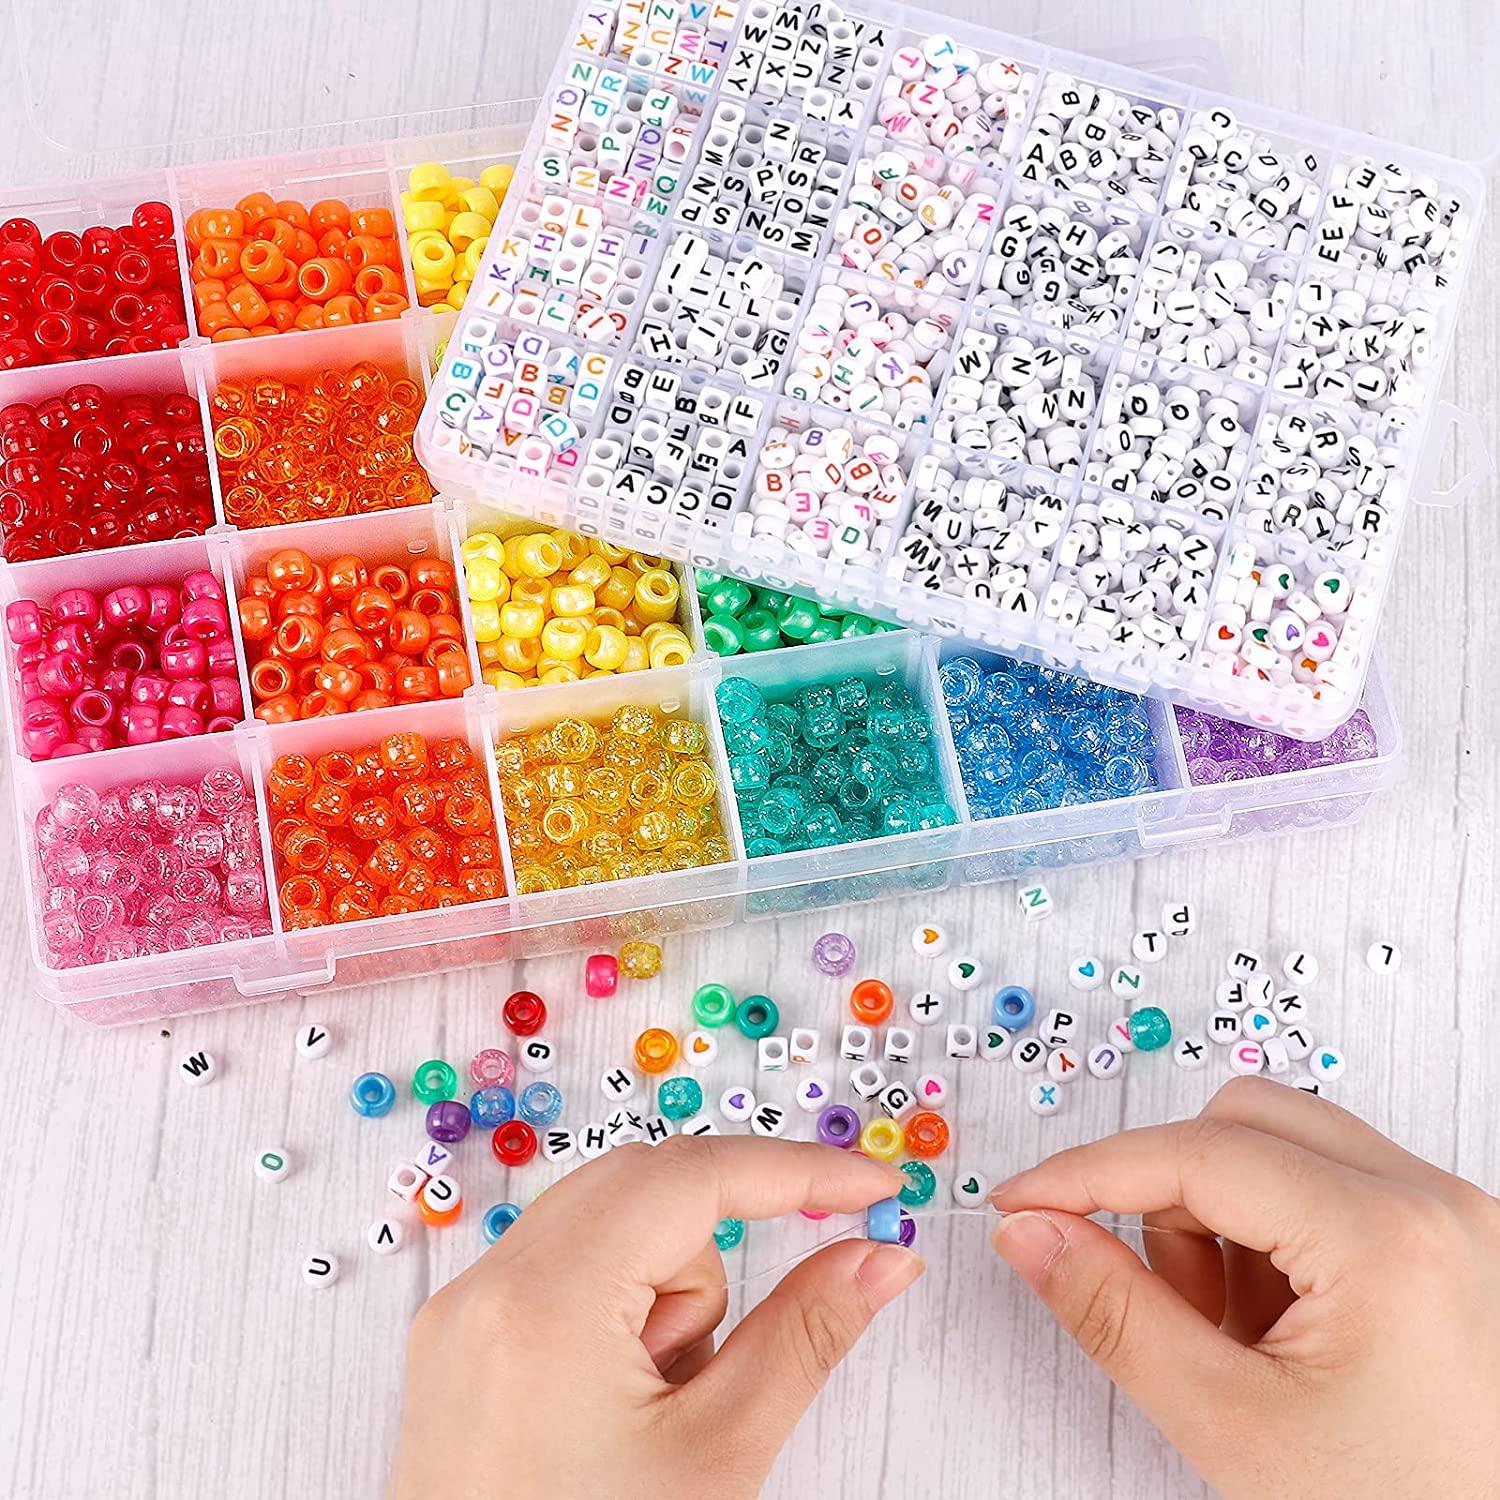 Quefe 3540Pcs Pony Beads 2400Pcs Rainbow Kandi Beads Bulk, Crafts Gift, In  48 Colors And 1020 Letter Beads, Polymer Clay Beads Smiley Face Beads For -  Imported Products from USA - iBhejo